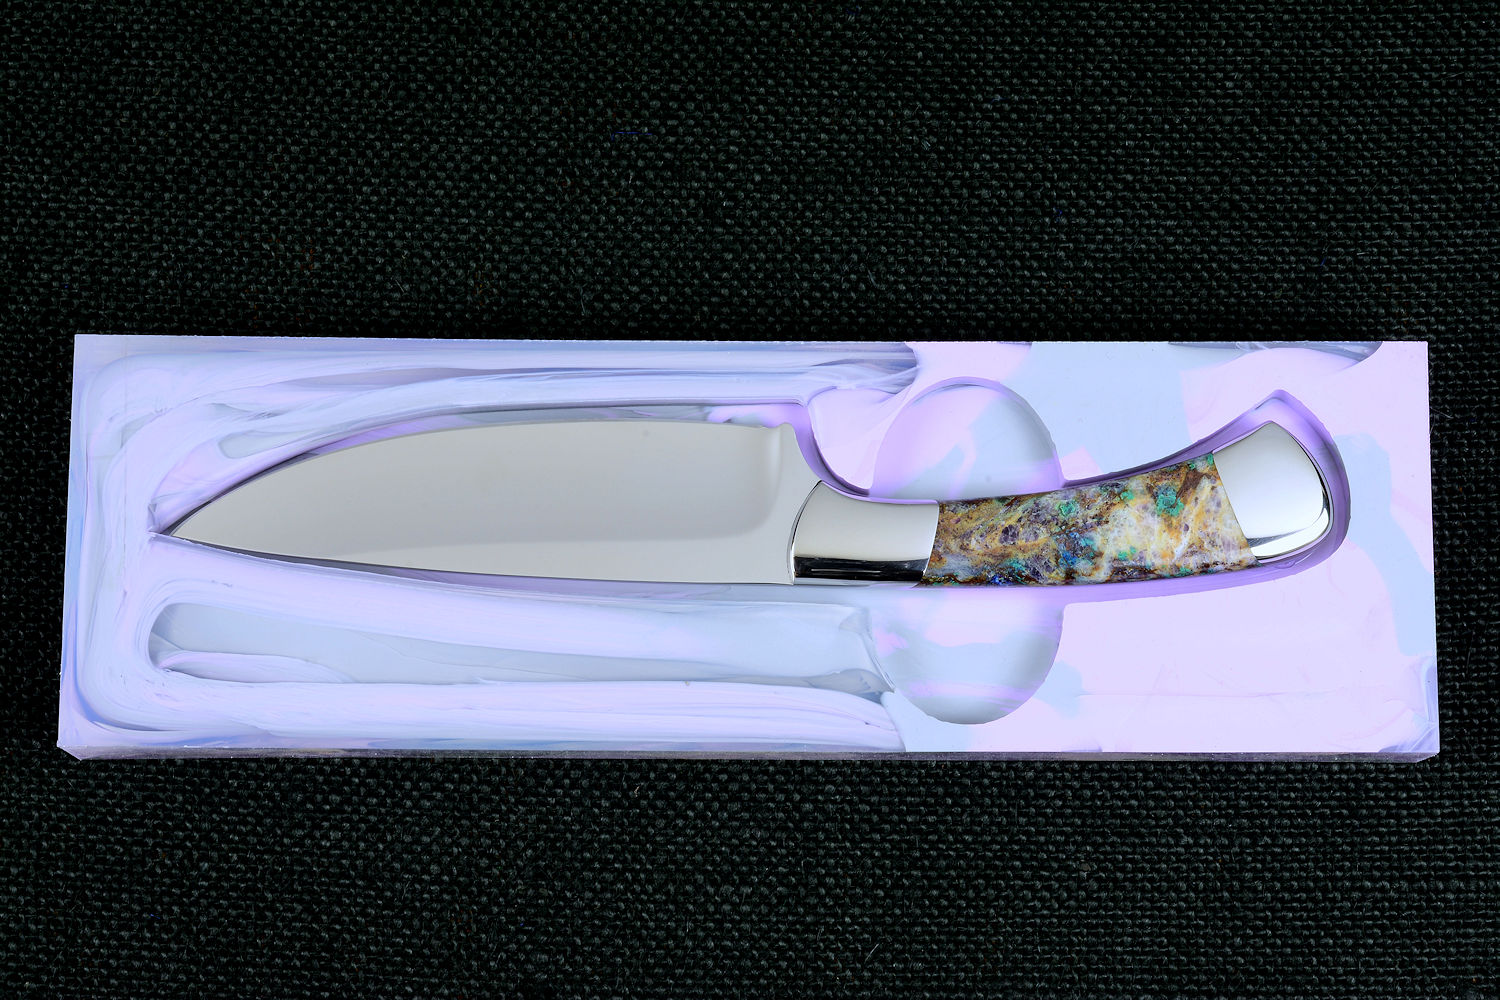 Cygnus ST in CPM154CM powder metal technology high molybenum stainless steel, T3 Deep cryogenically treated blade, 304 stainless steel bolsters, Kaleidoscope Stone gemstone handle, hand-dyed, hand-cast silicone prise